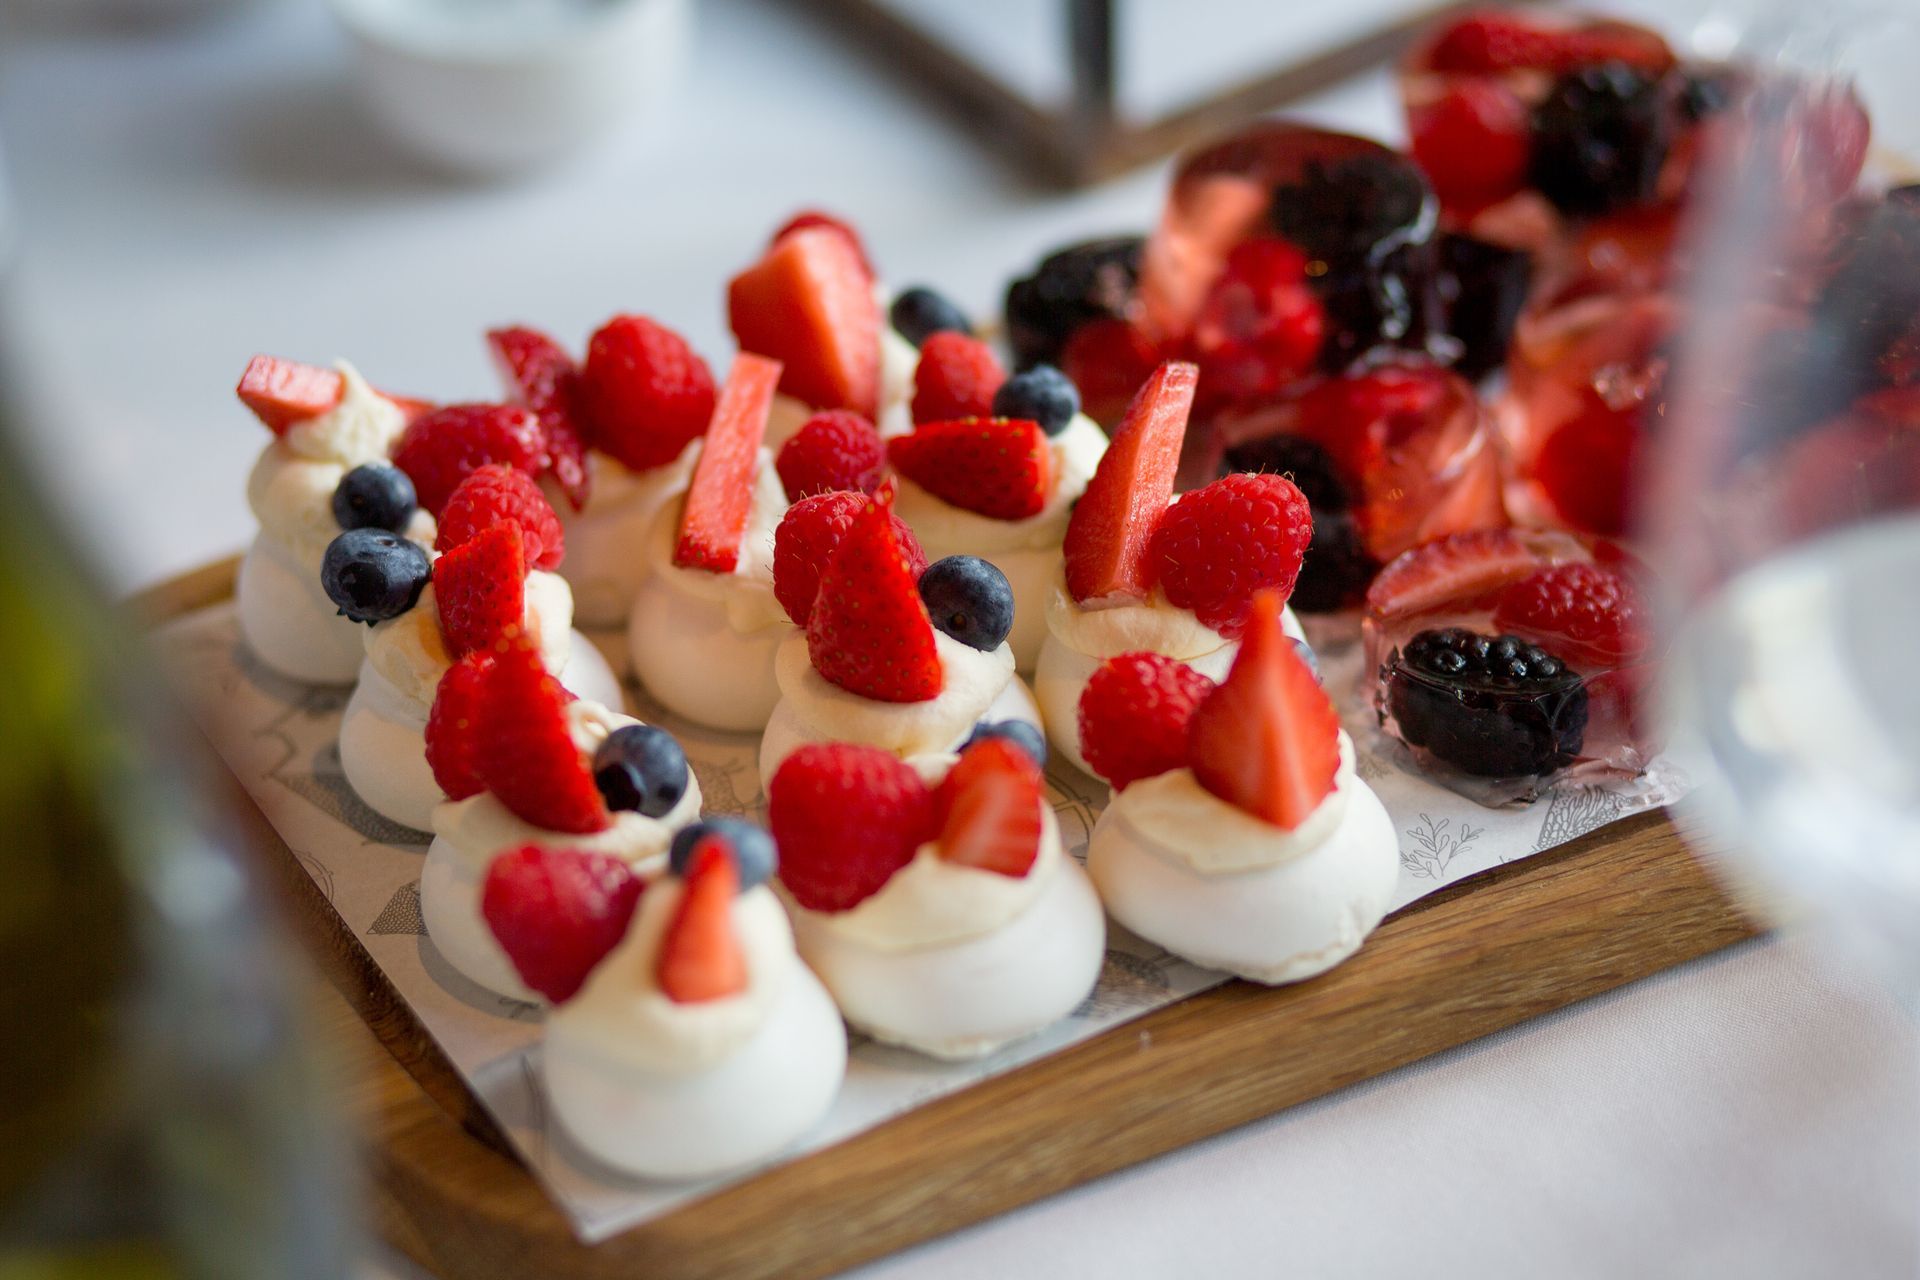 A wooden cutting board topped with meringue and berries.